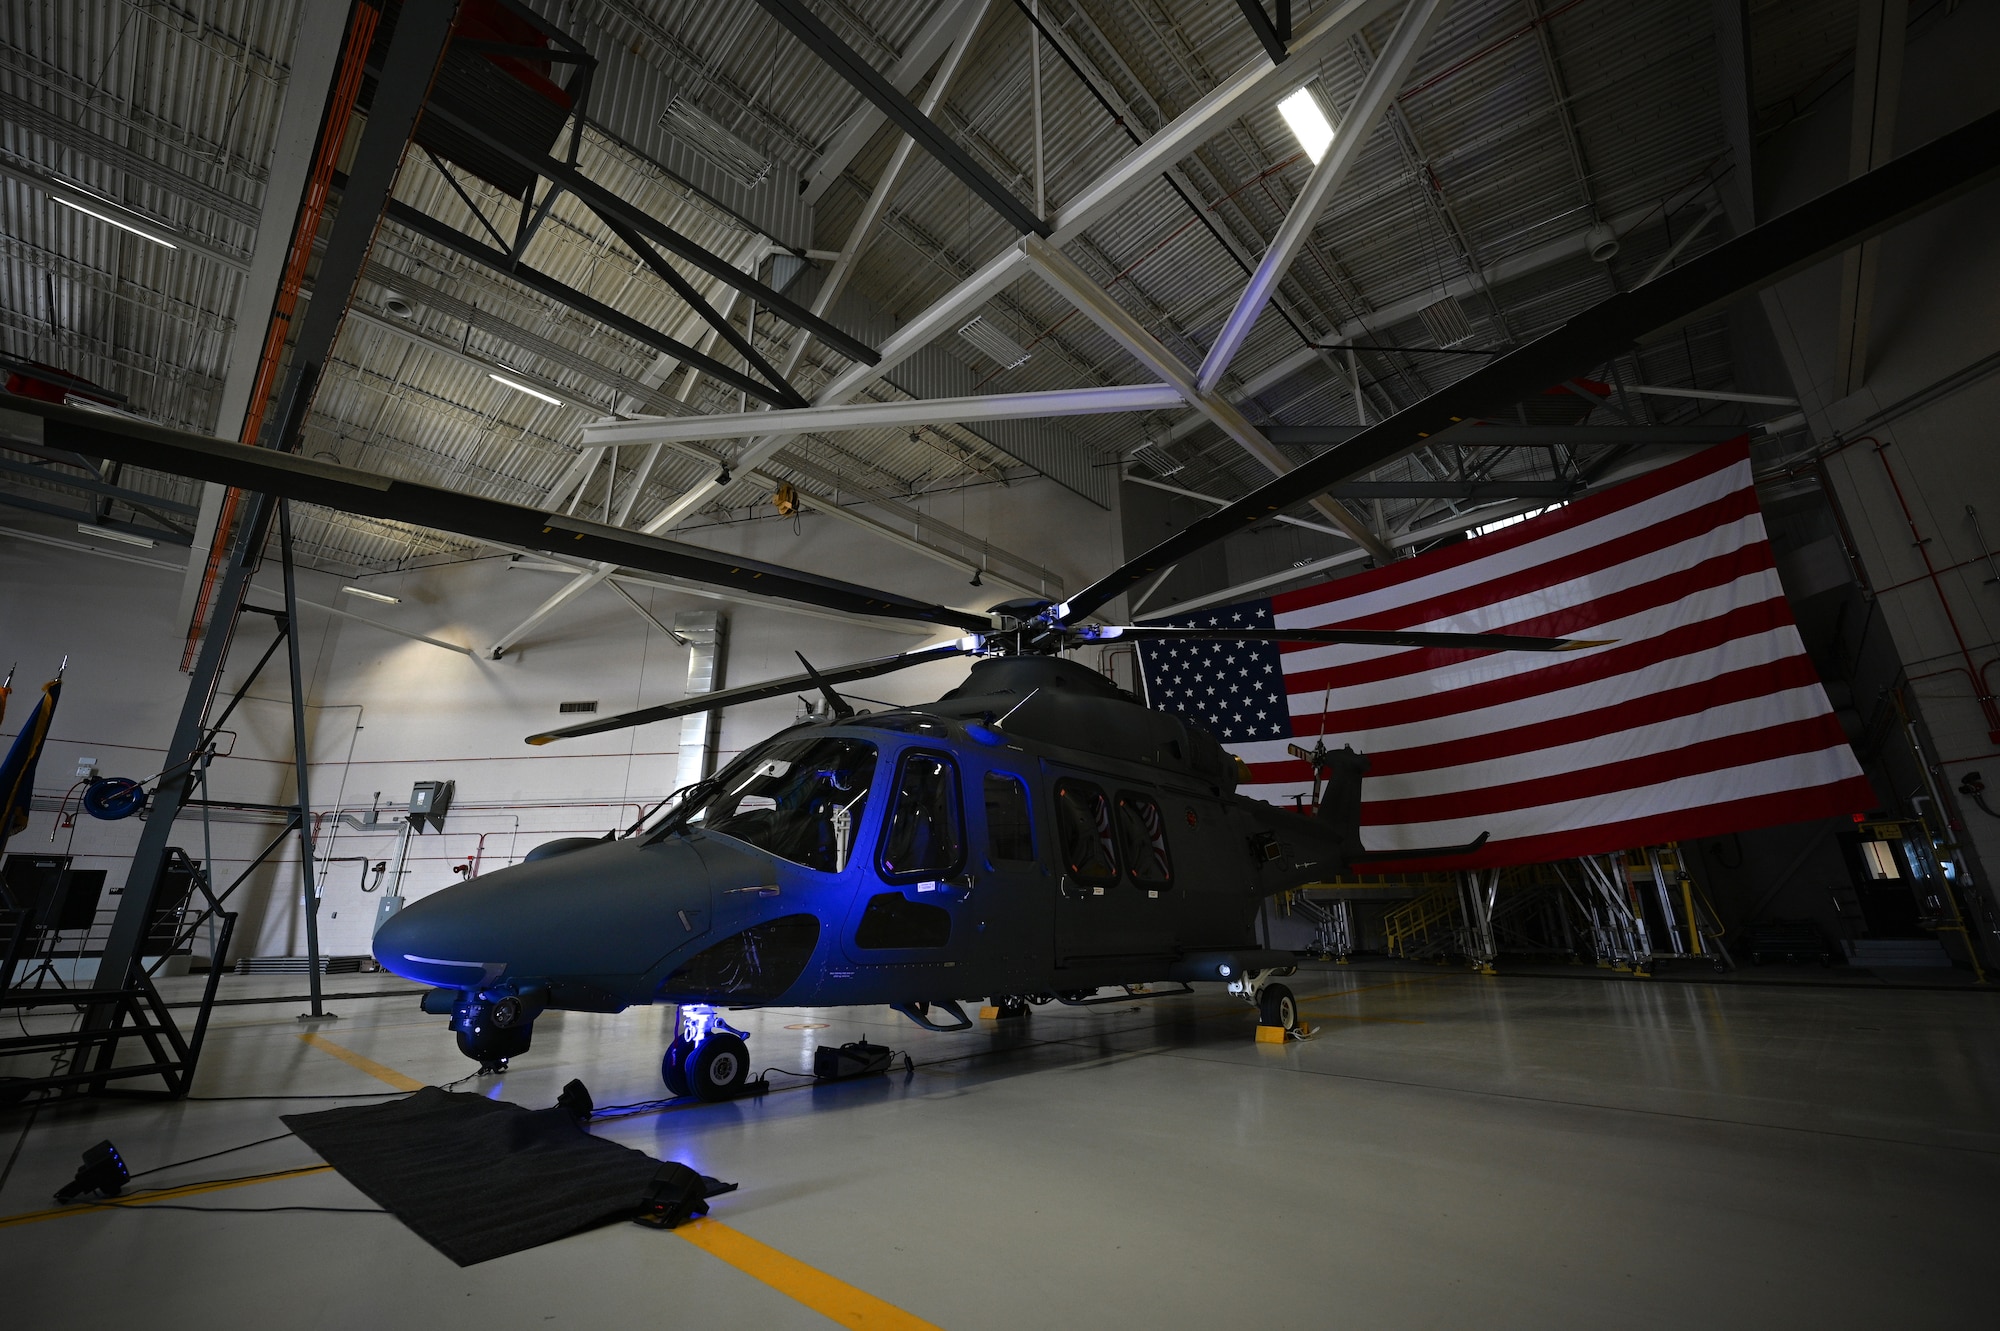 A grey helicopter is displayed in an aircraft hangar with a large American flag behind it.